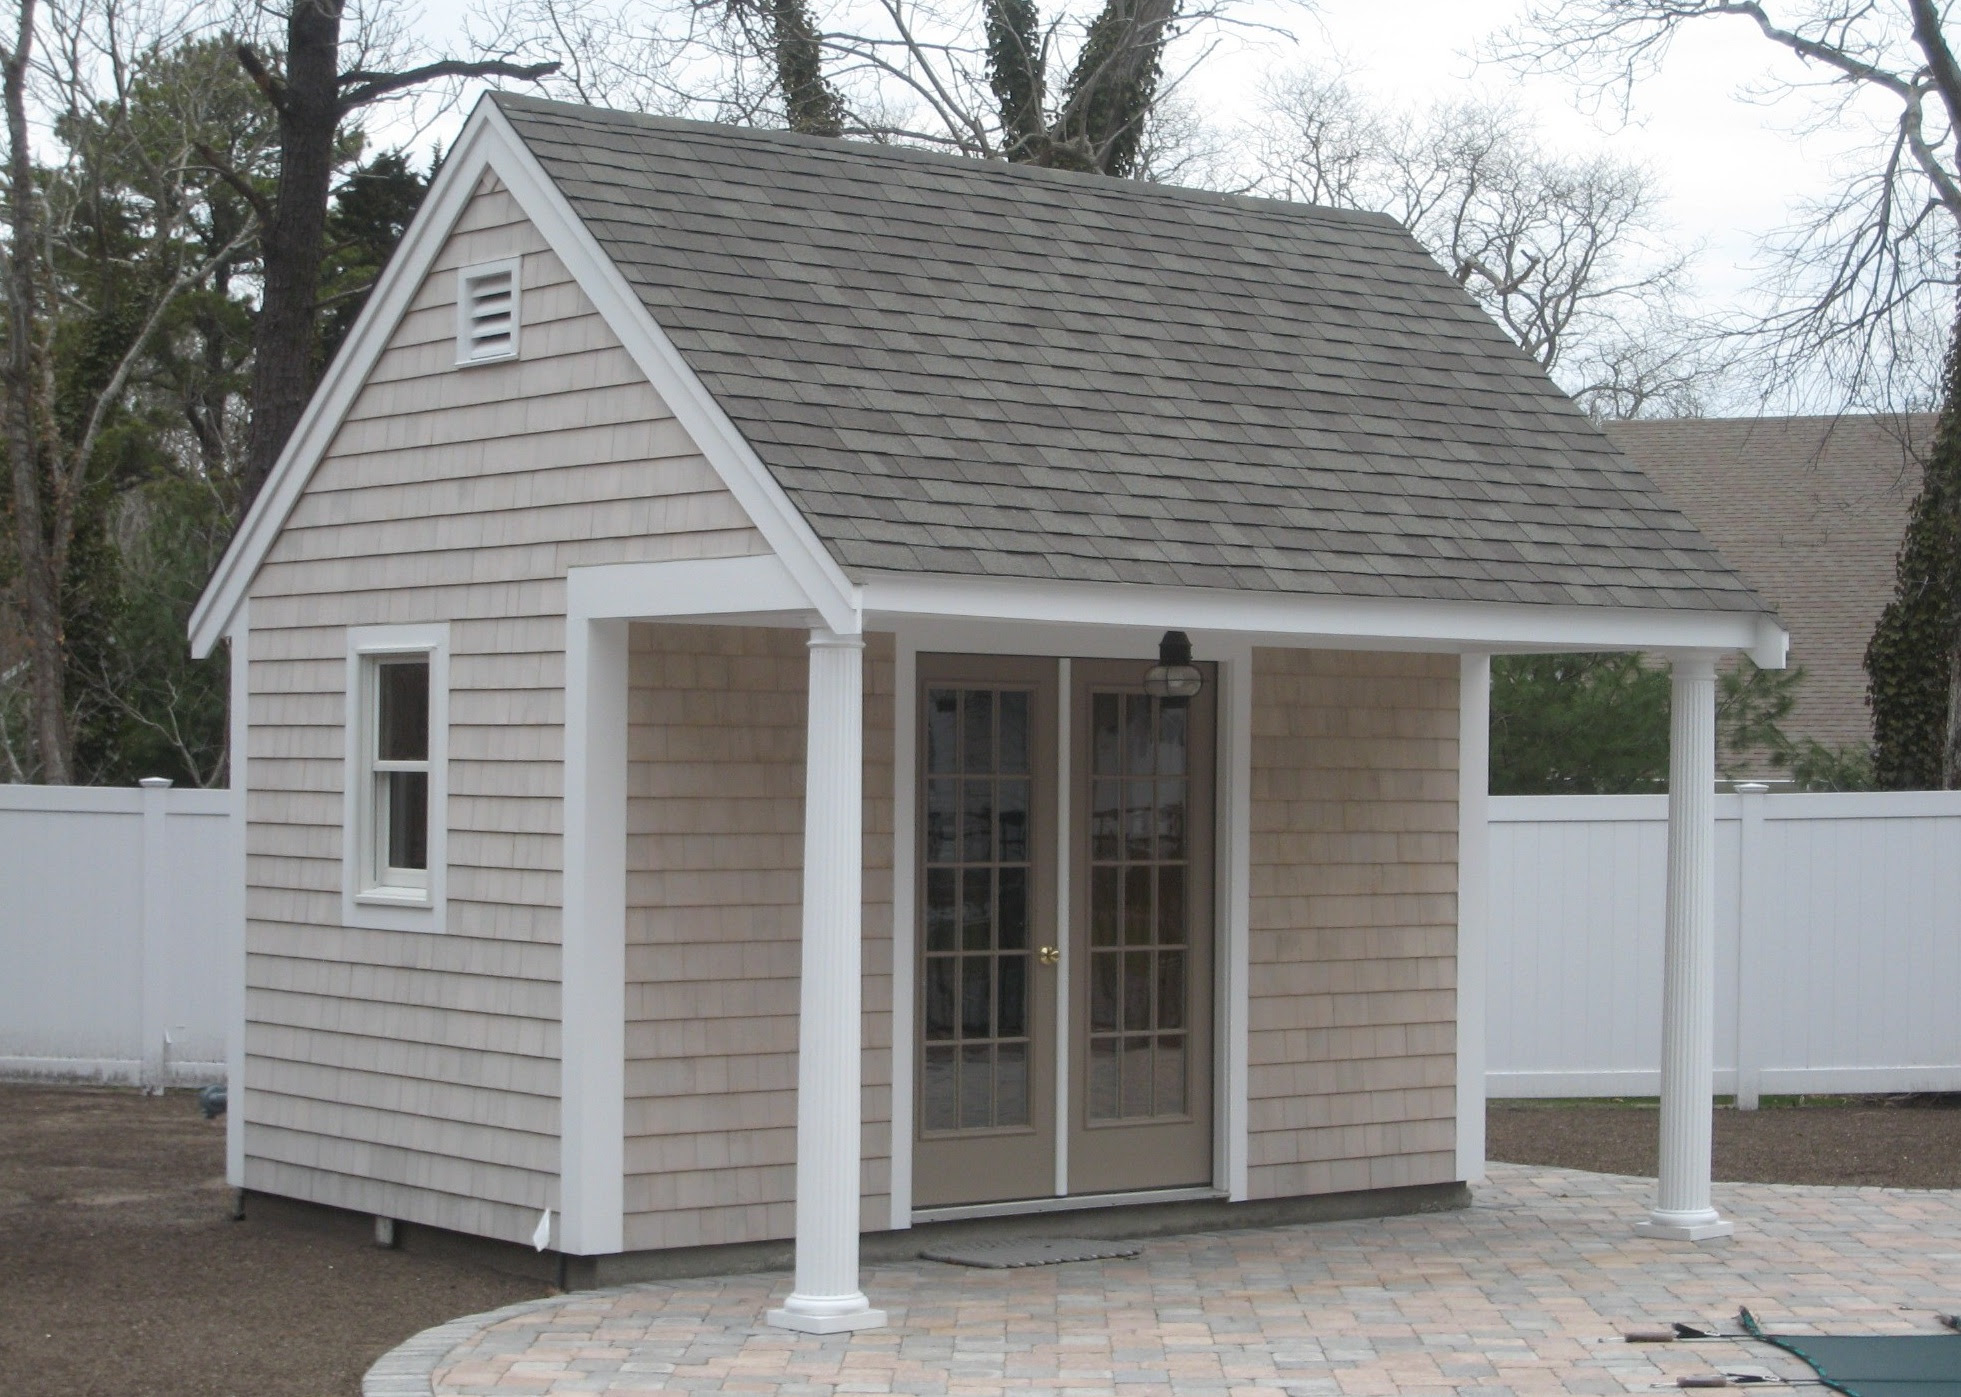 Chea: Instant Get Plans for garden sheds with porches